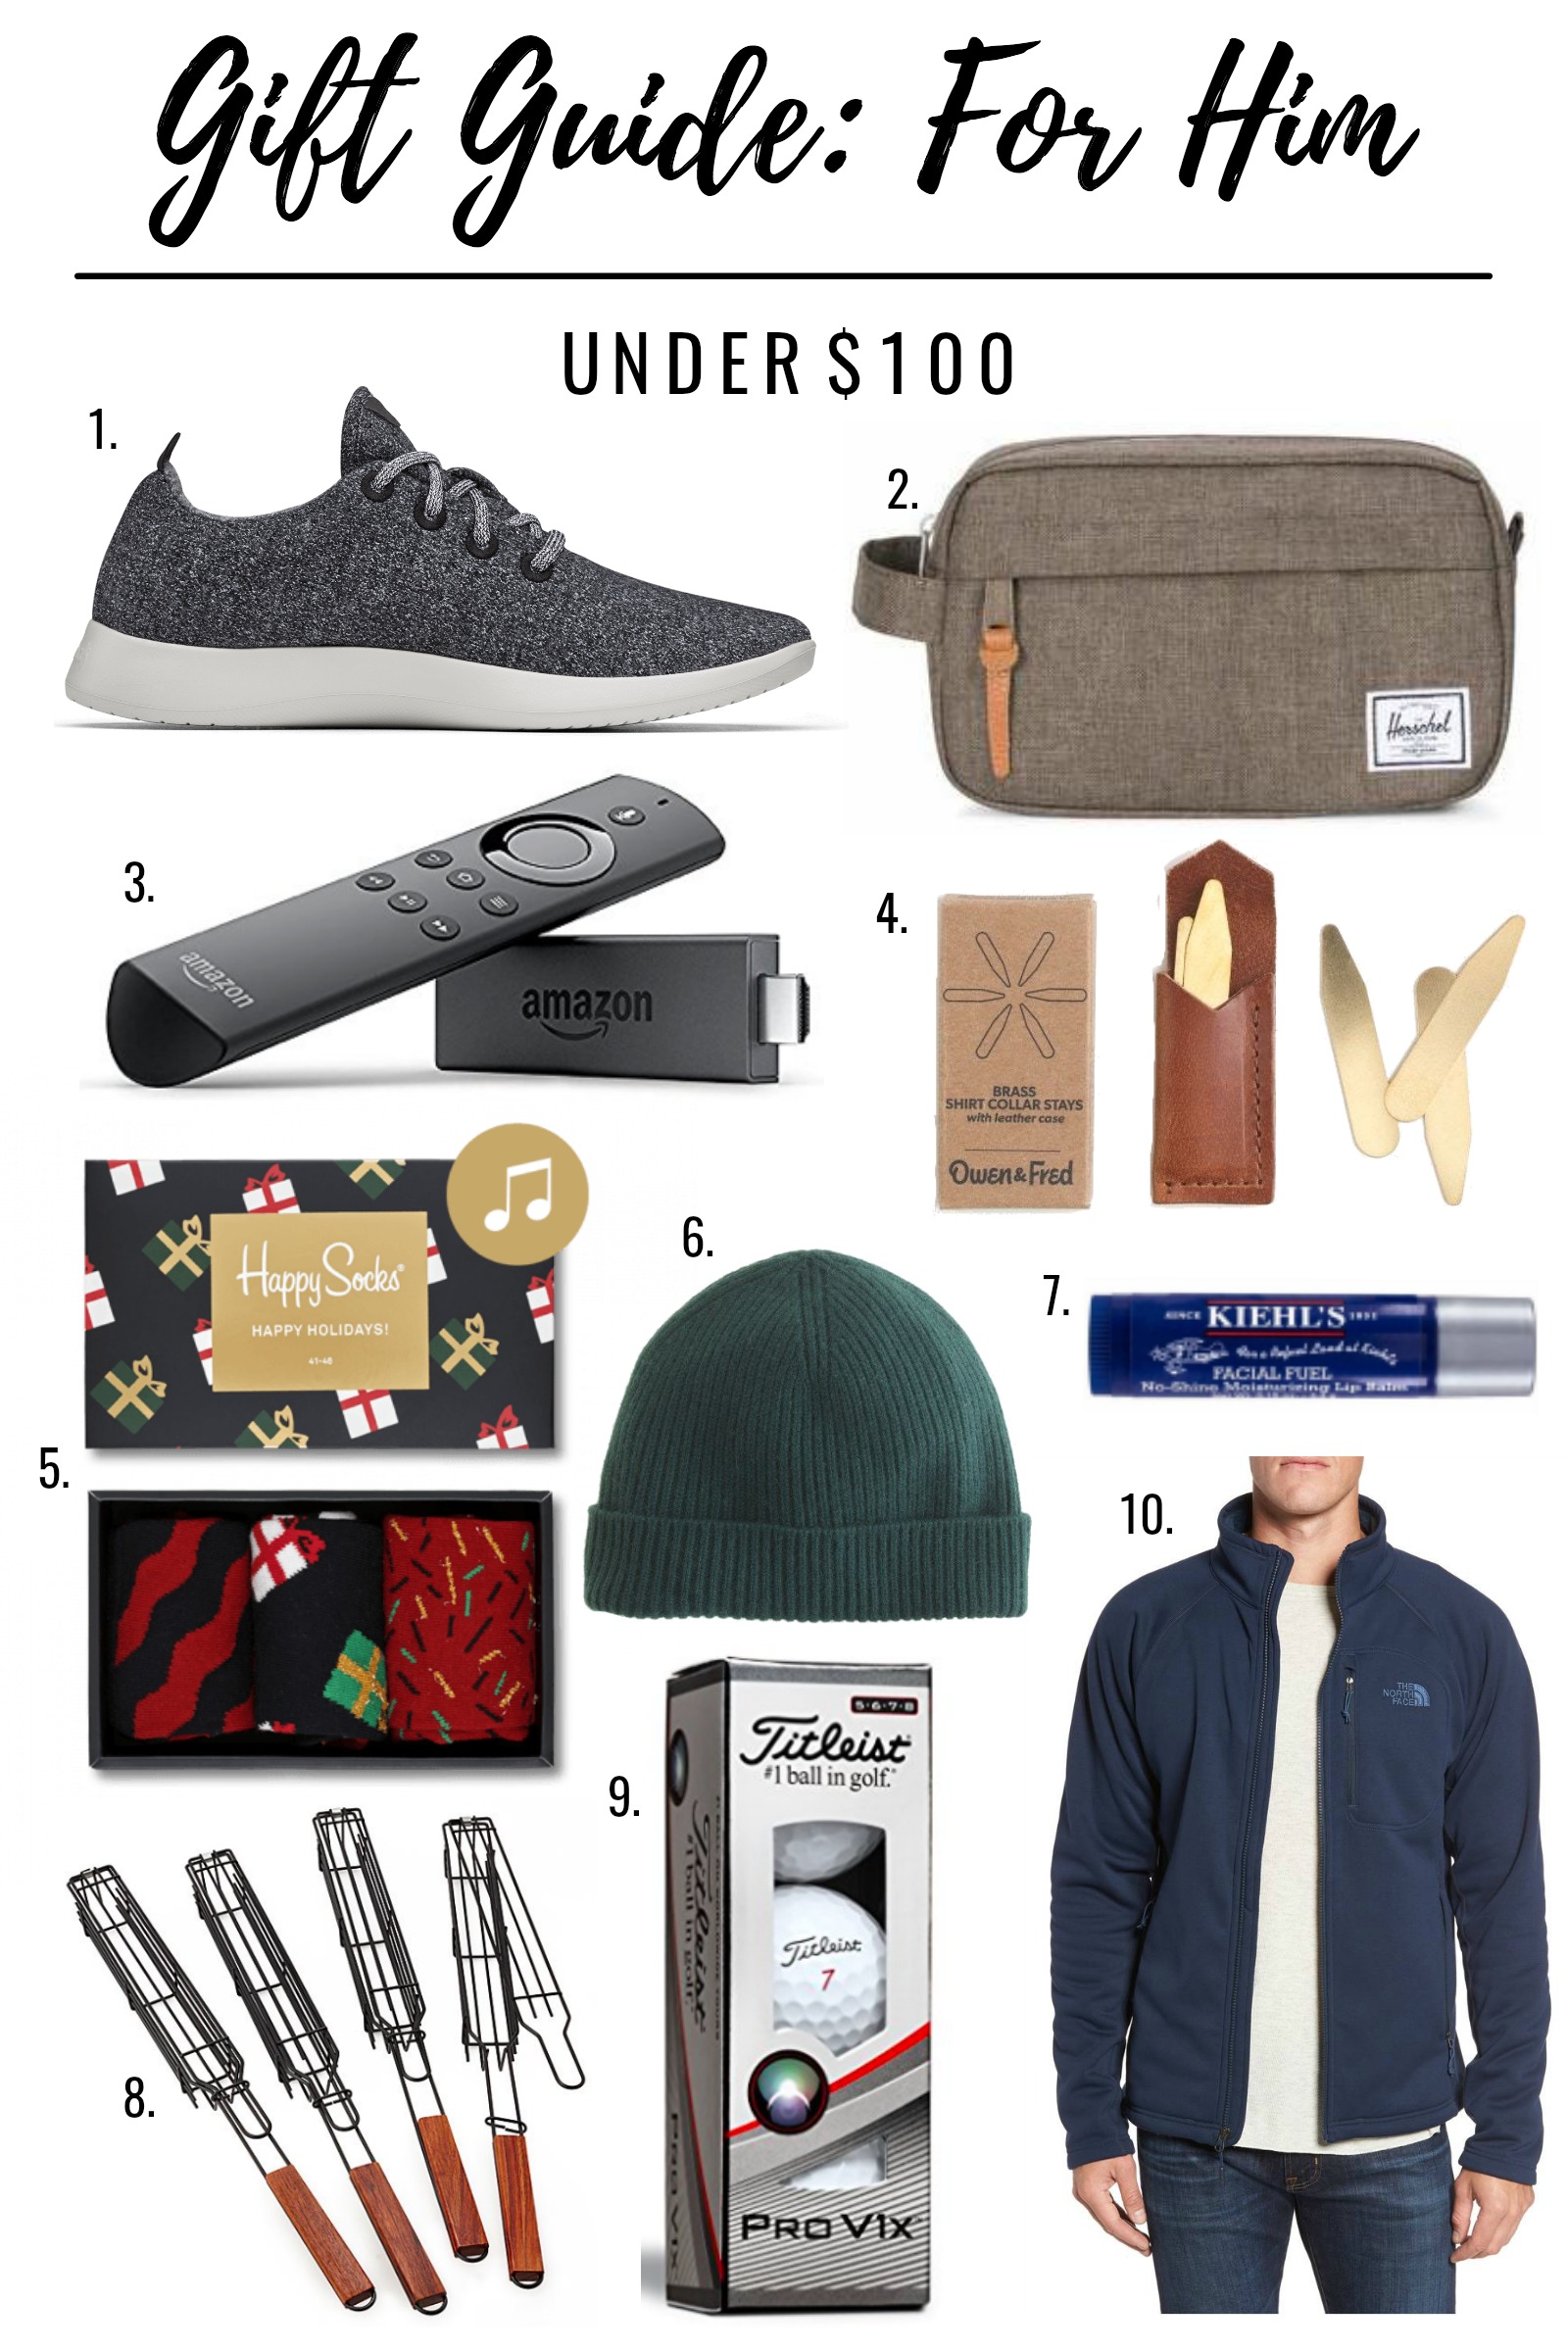 Holiday Gift Guide 2022: Gifts Under $50, $100 + Splurge Gifts